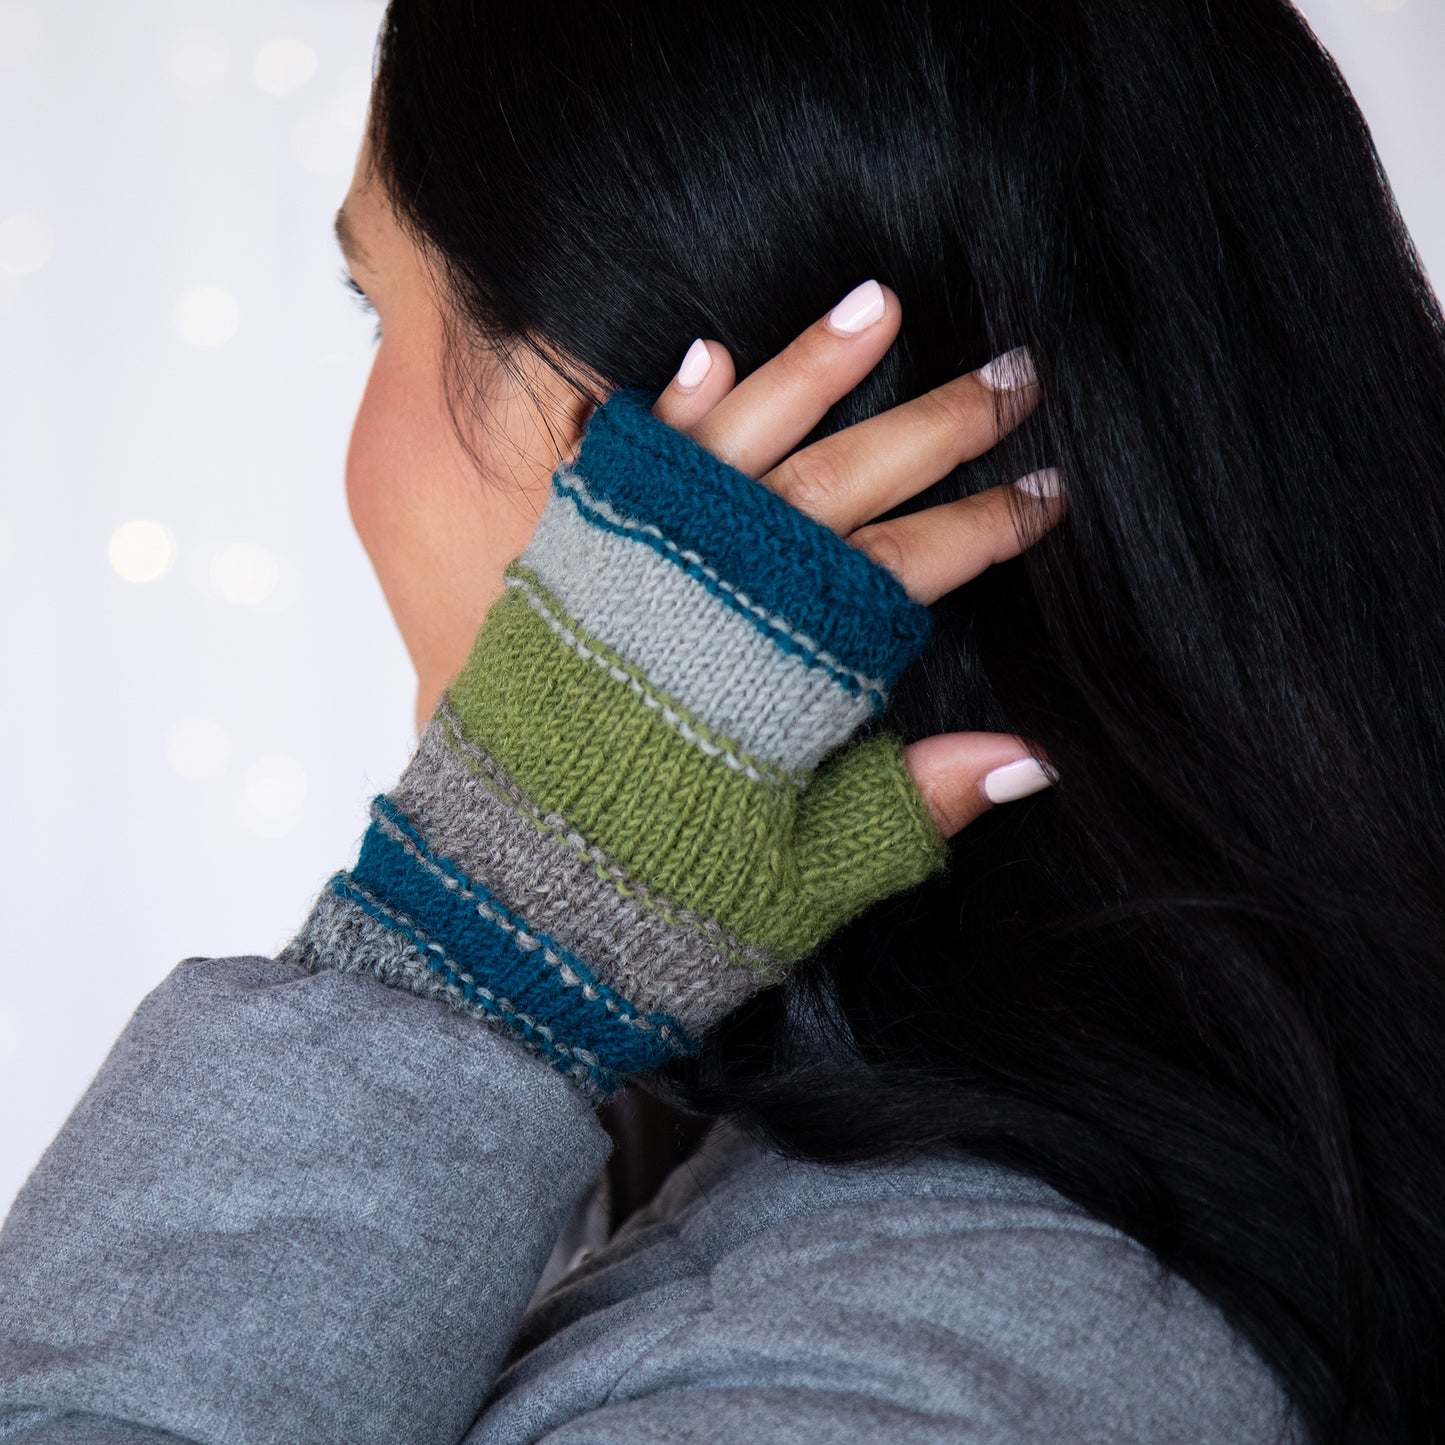 Bold Stripes Hand Knit Hand Warmers